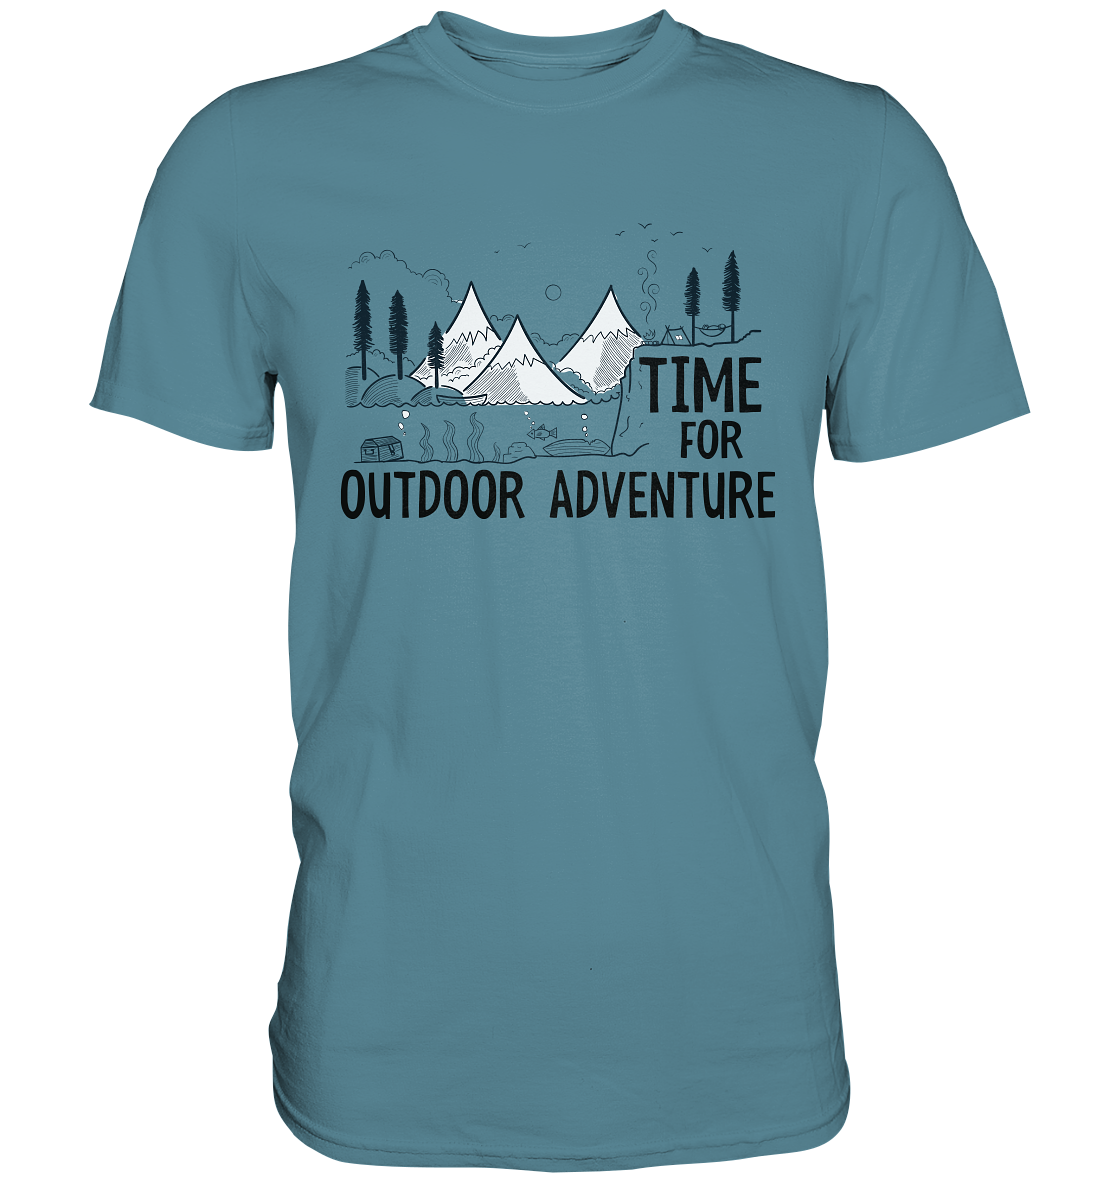 Time for Outdoor Adventure. Camping - Premium Shirt